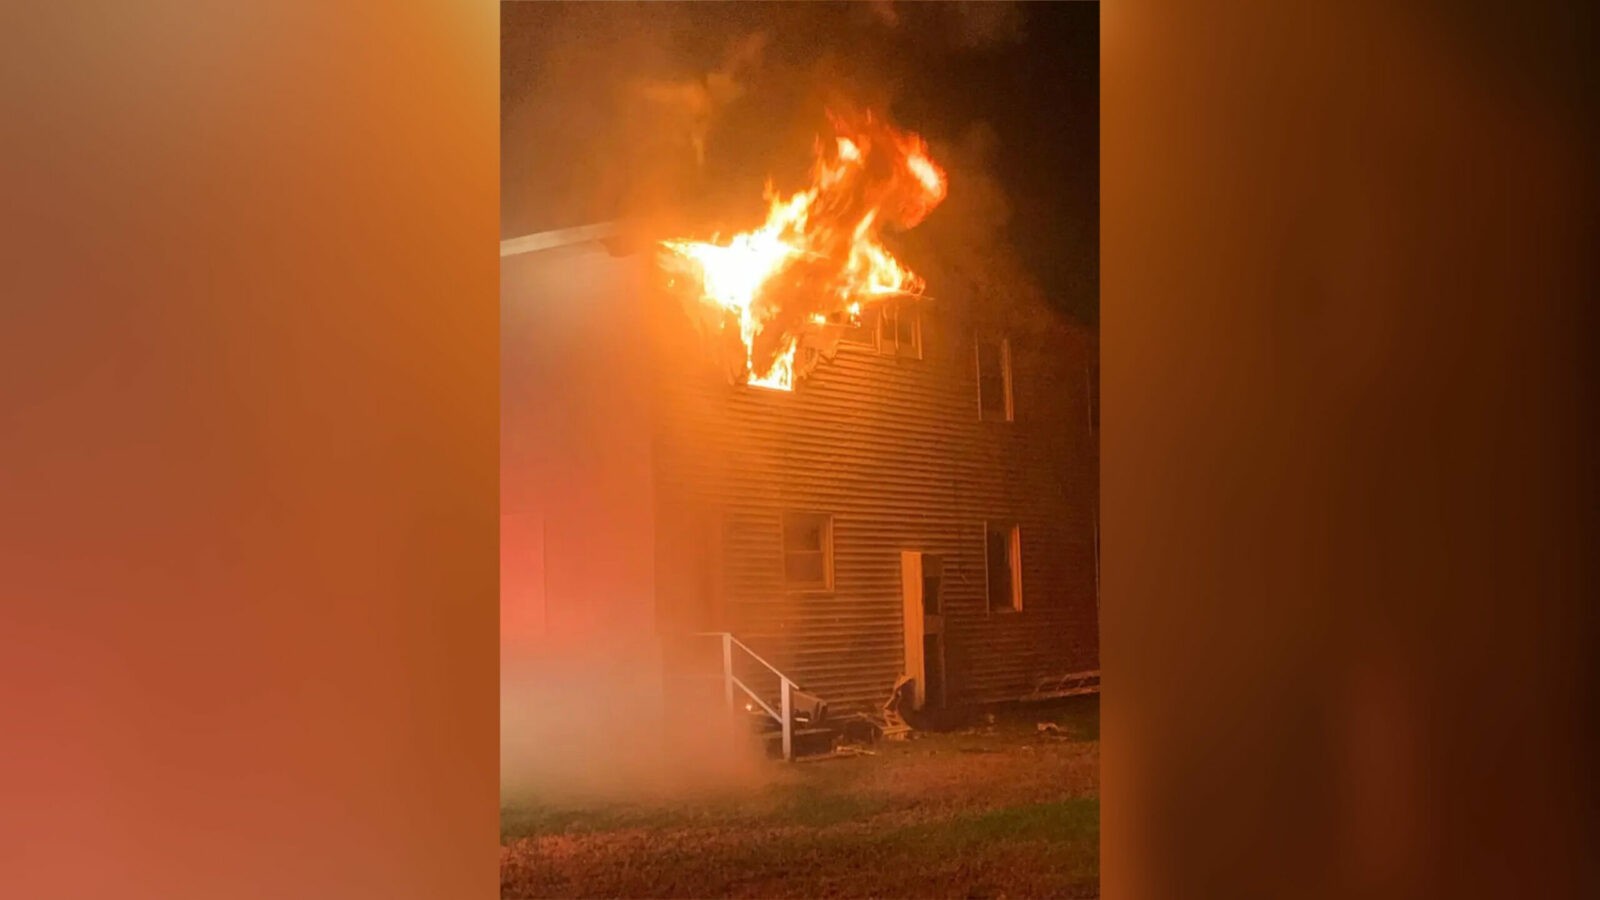 11-Year-Old Boy Rescues 2-Year-Old Sister From Apartment Fire Two Days Before Thanksgiving